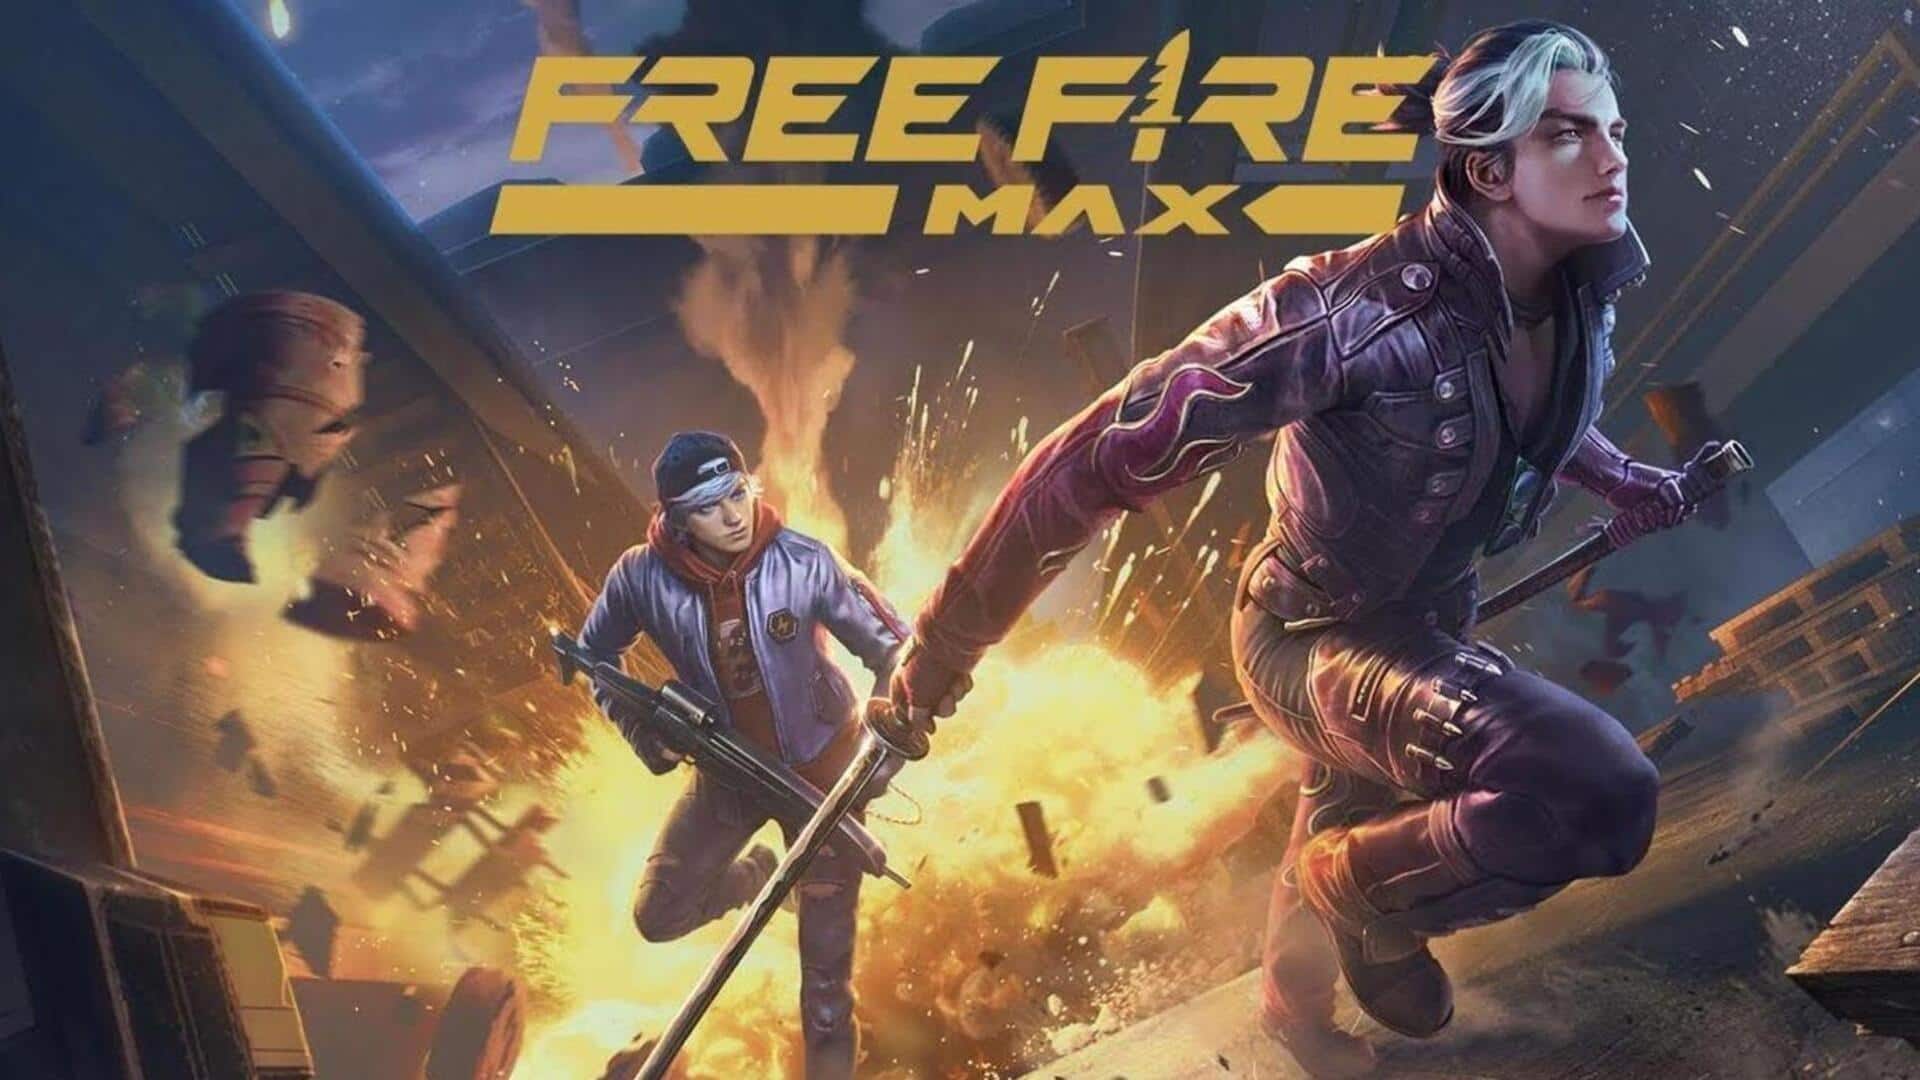 Garena Free Fire MAX codes for December 24